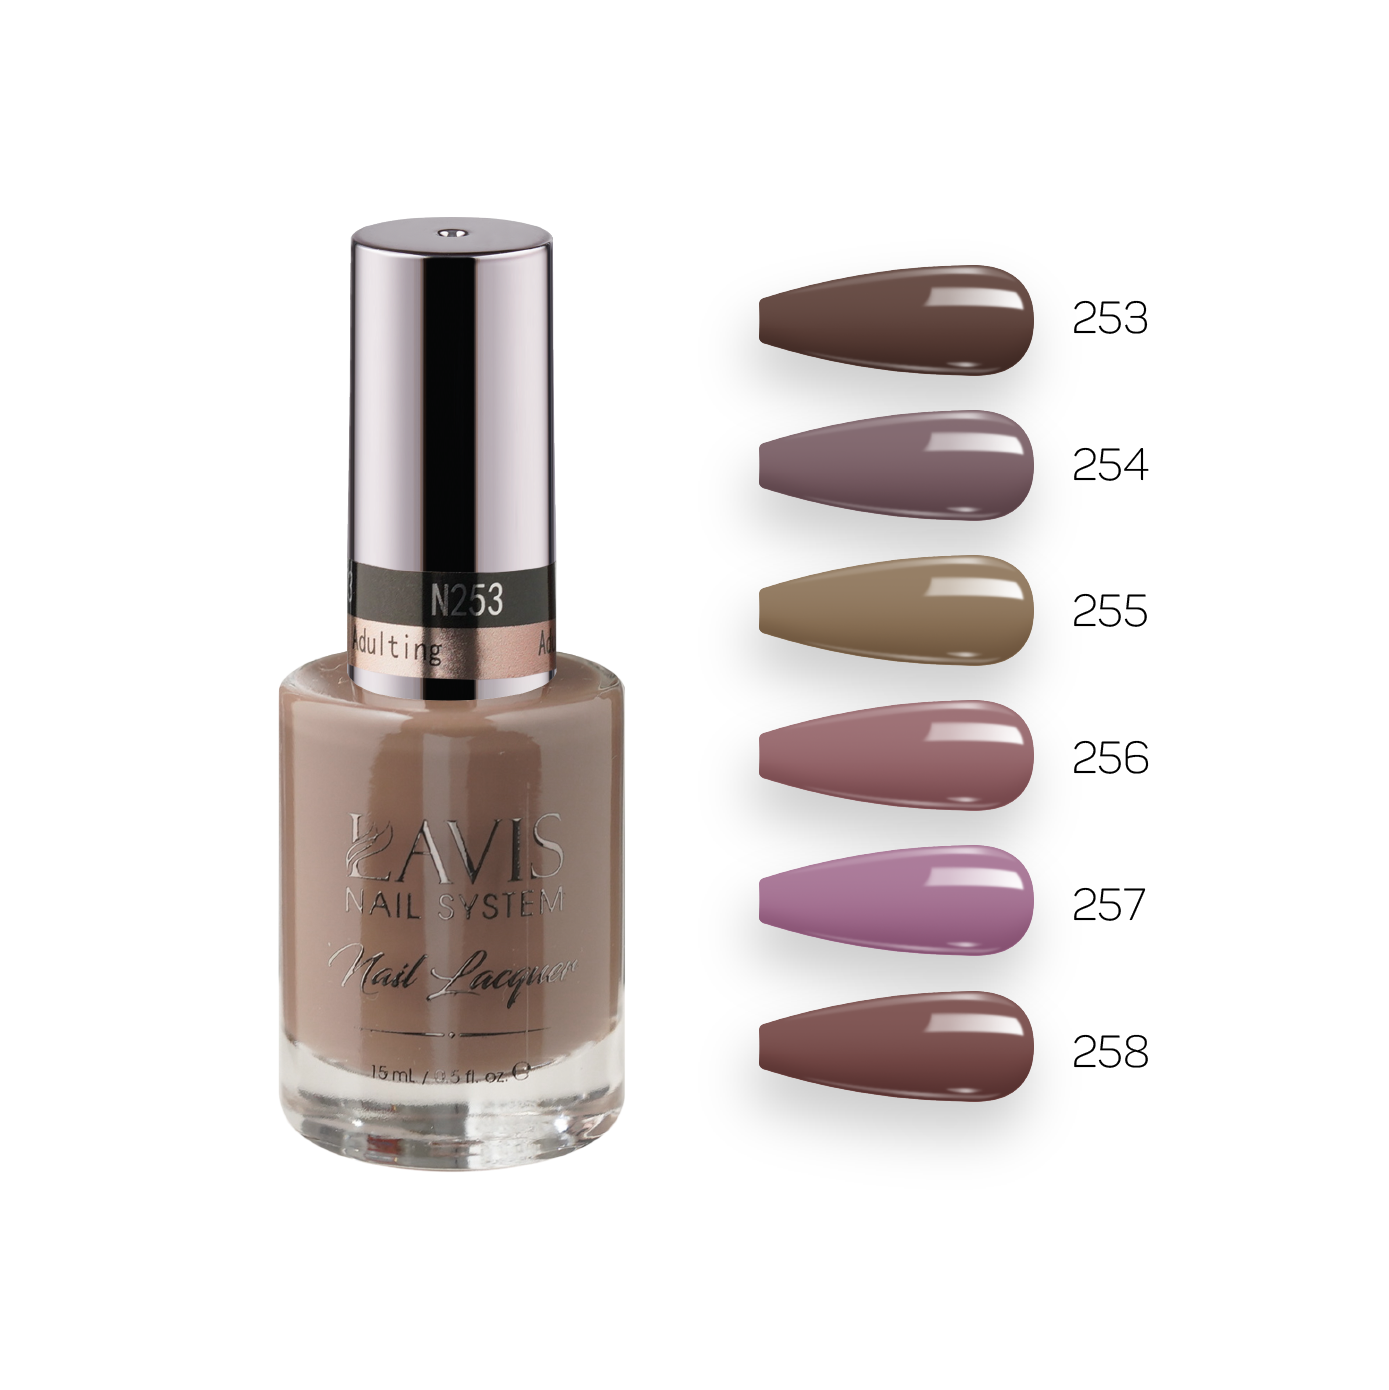 Lavis Healthy Nail Lacquer Fall Winter Set N5 (6 colors) : 253, 254, 255, 256, 257, 258